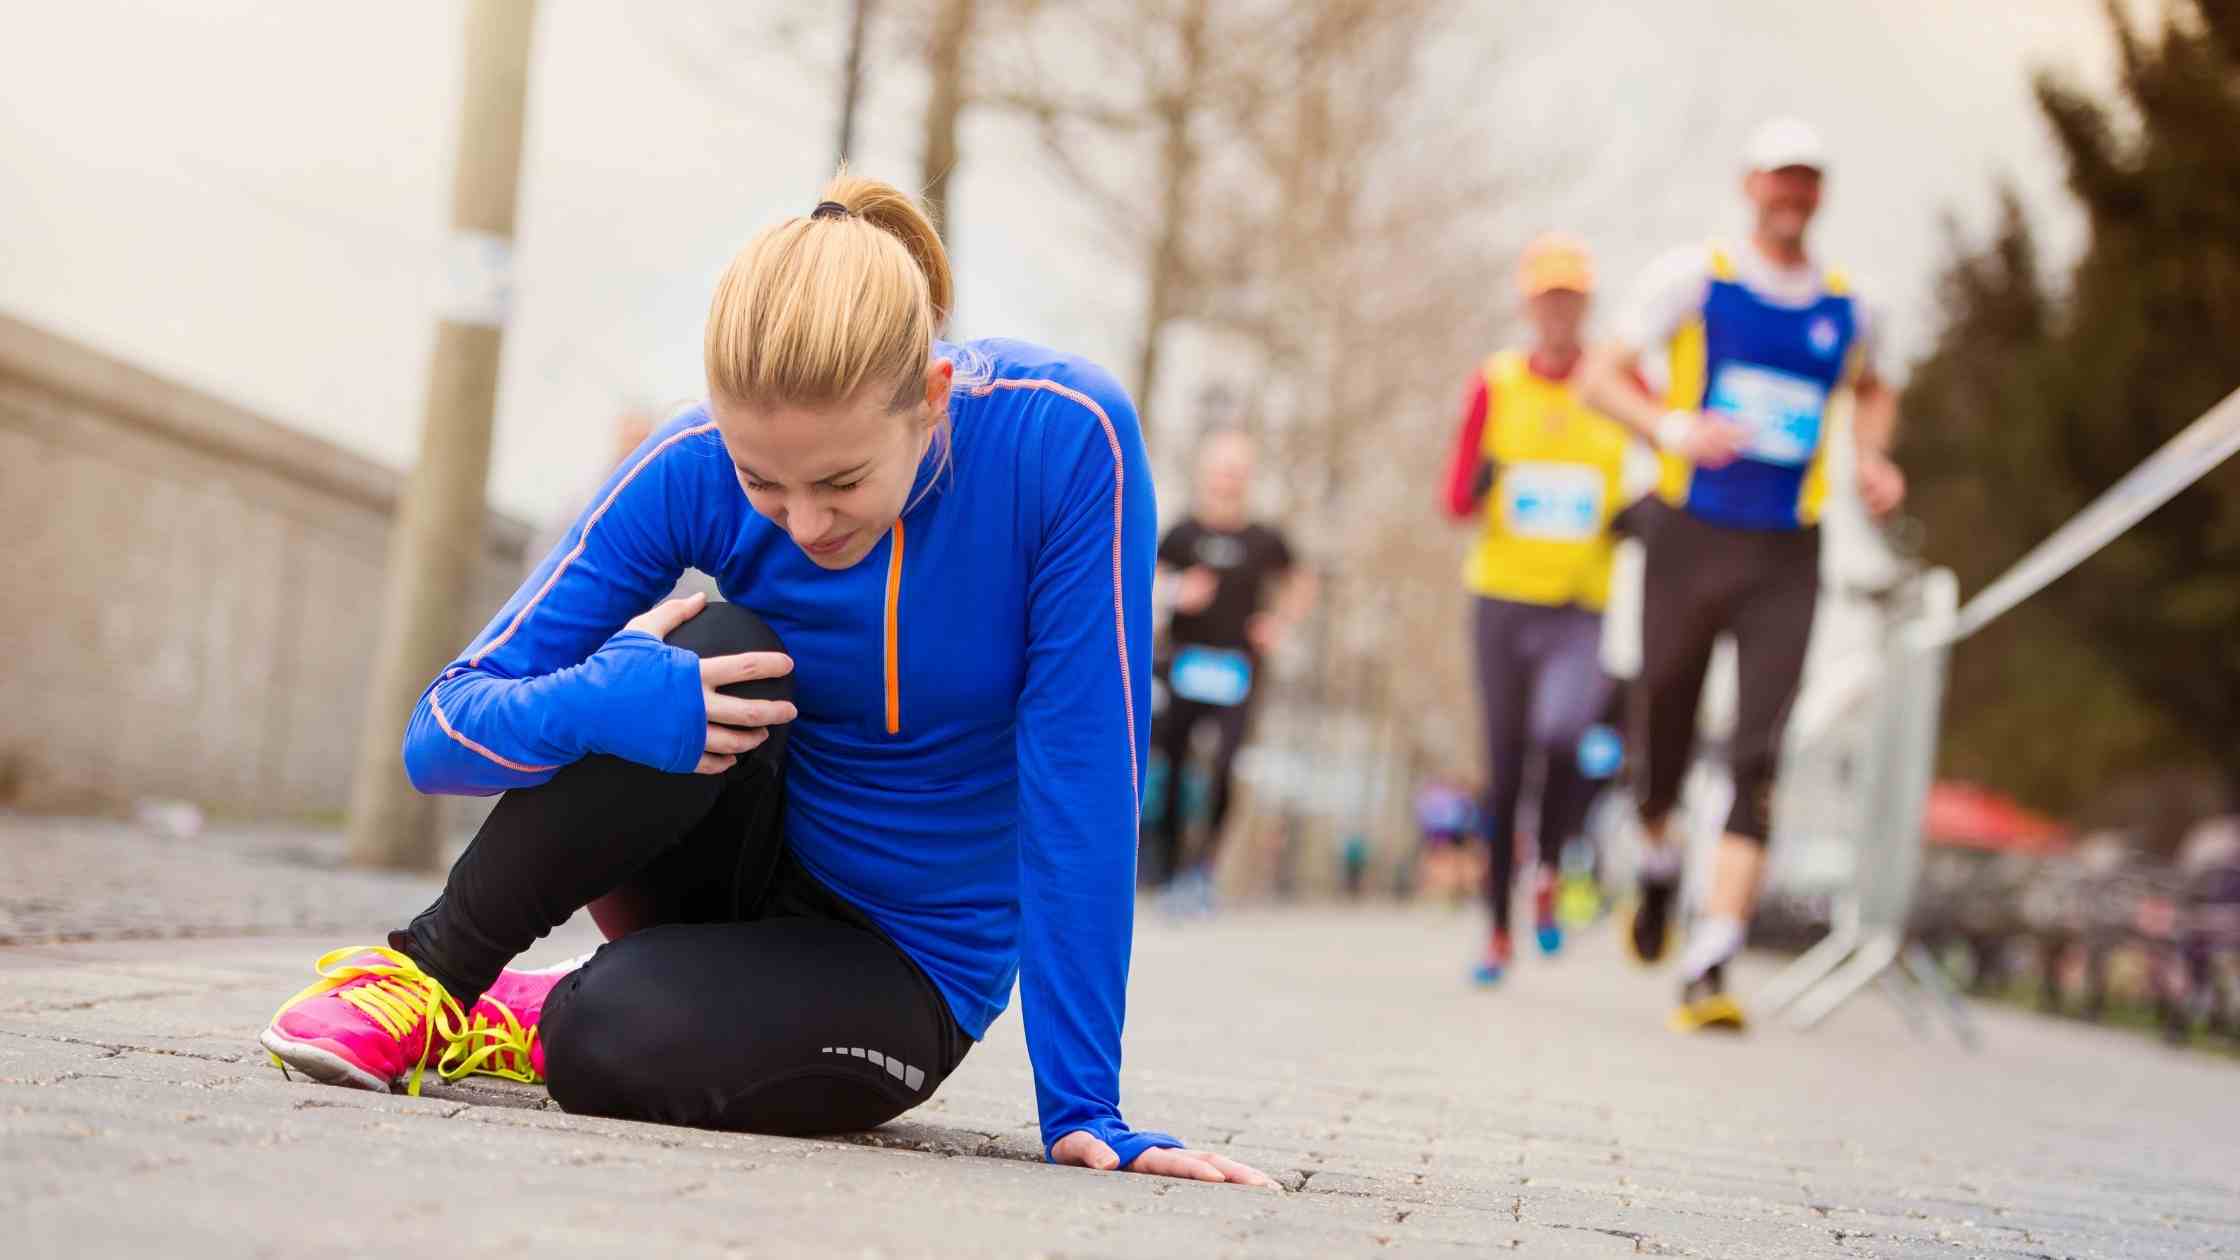 What You Need To Know About Running Injuries